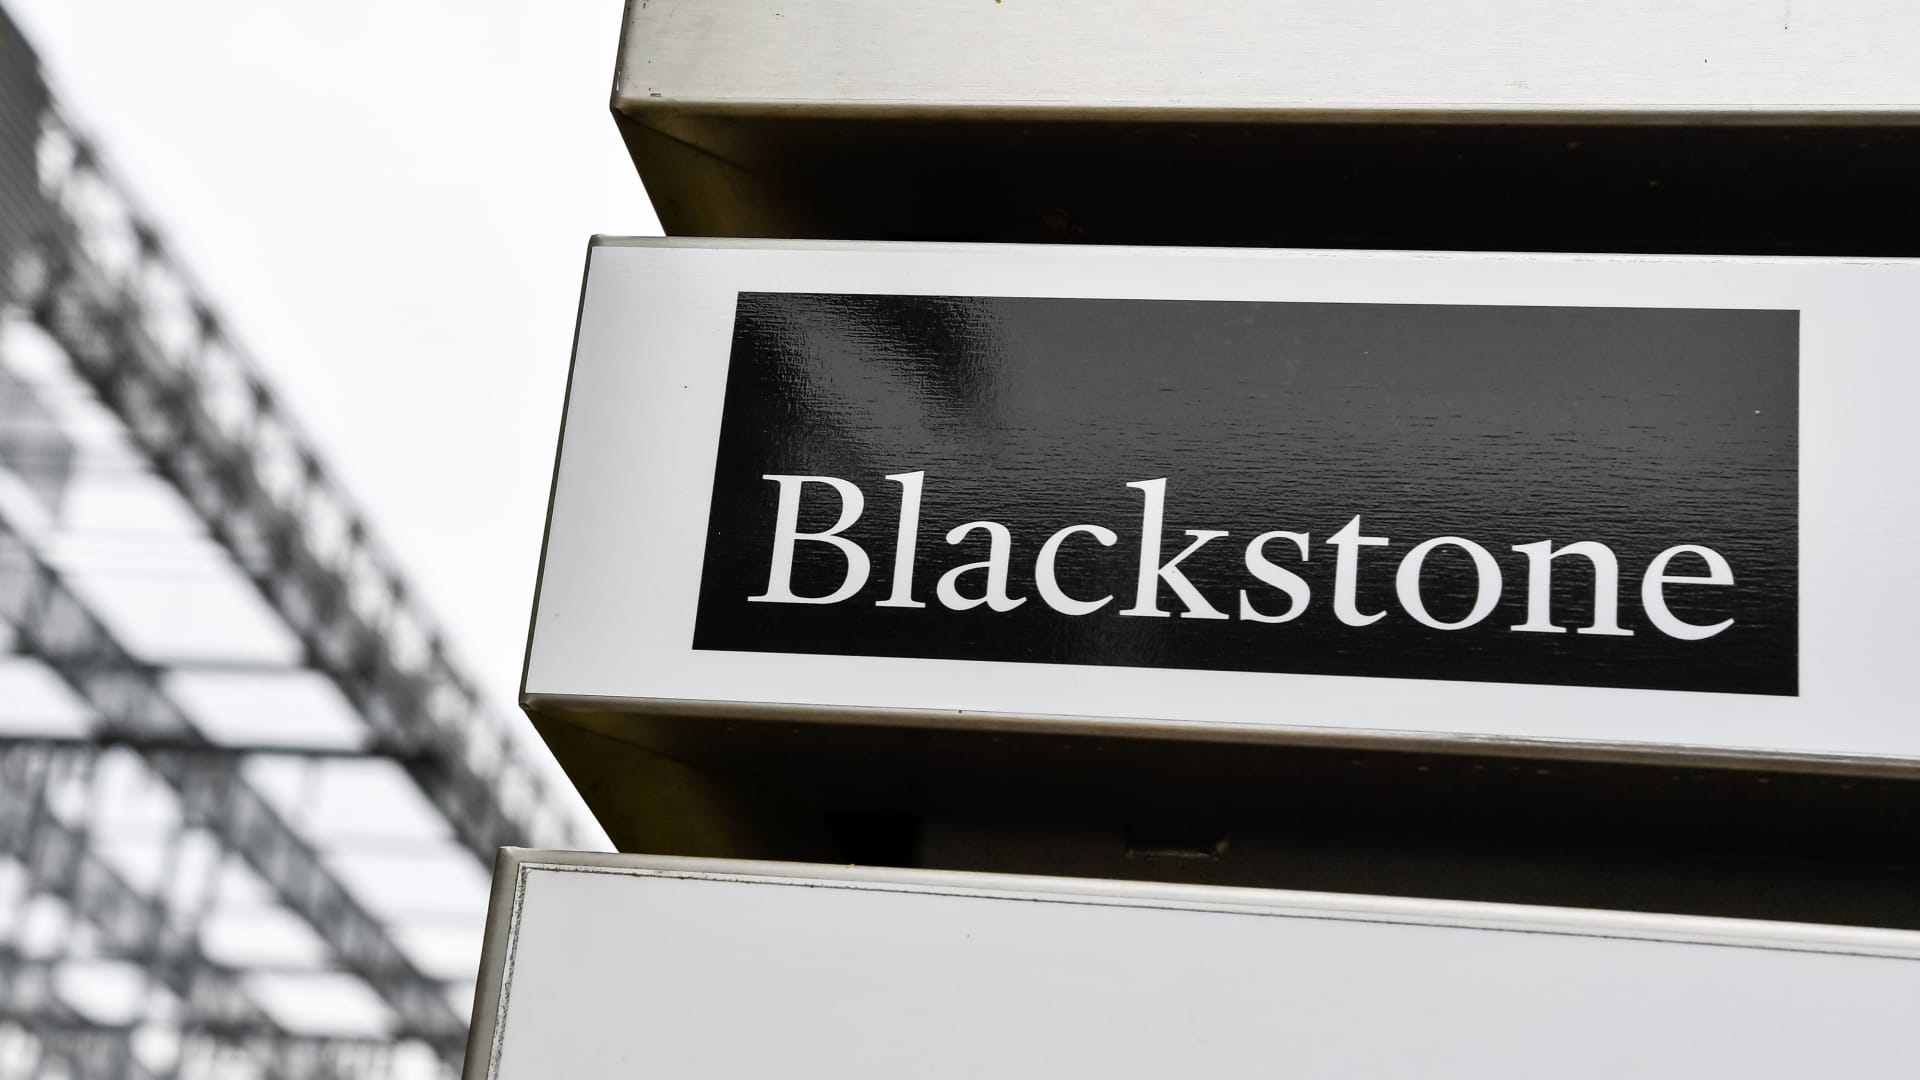 Blackstone chief defends real estate fund amid rush for withdrawals